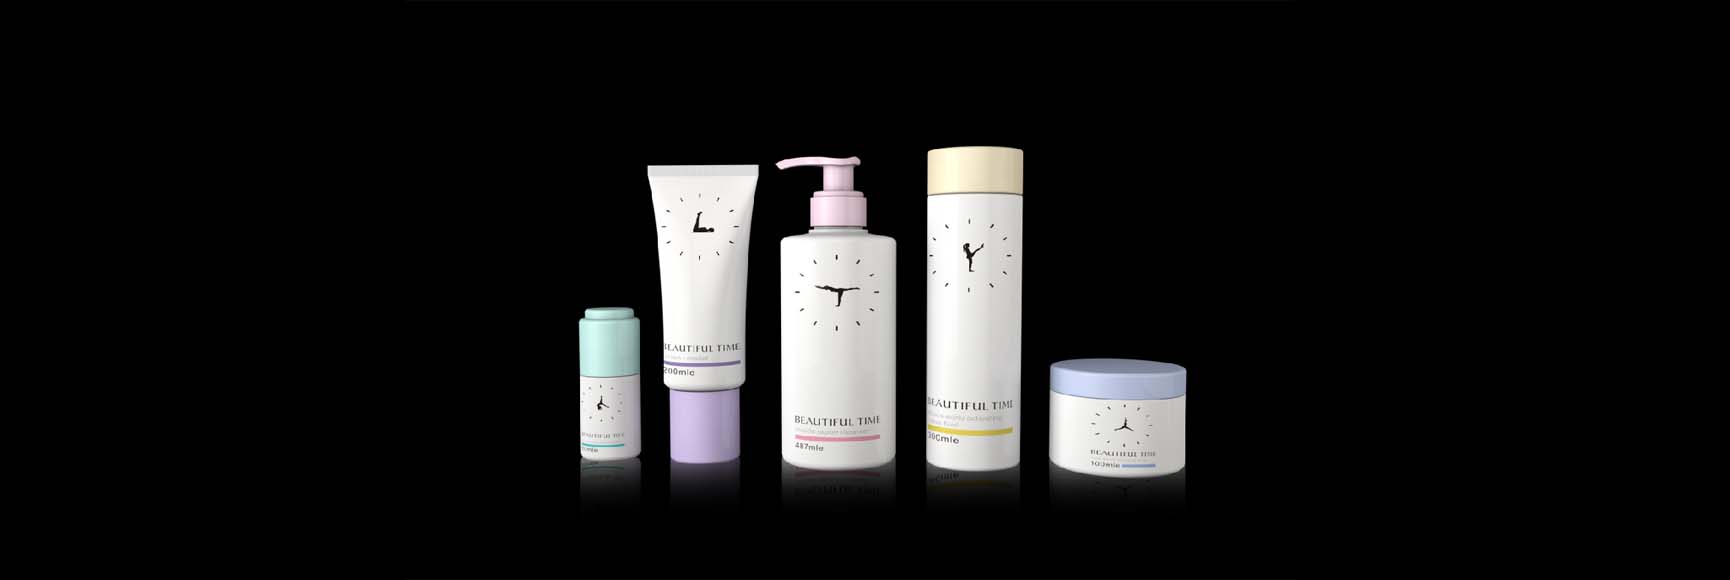 China Manufacturer for Green Packaging Design - BEAUTIFUL TIME – BXL Creative Packaging